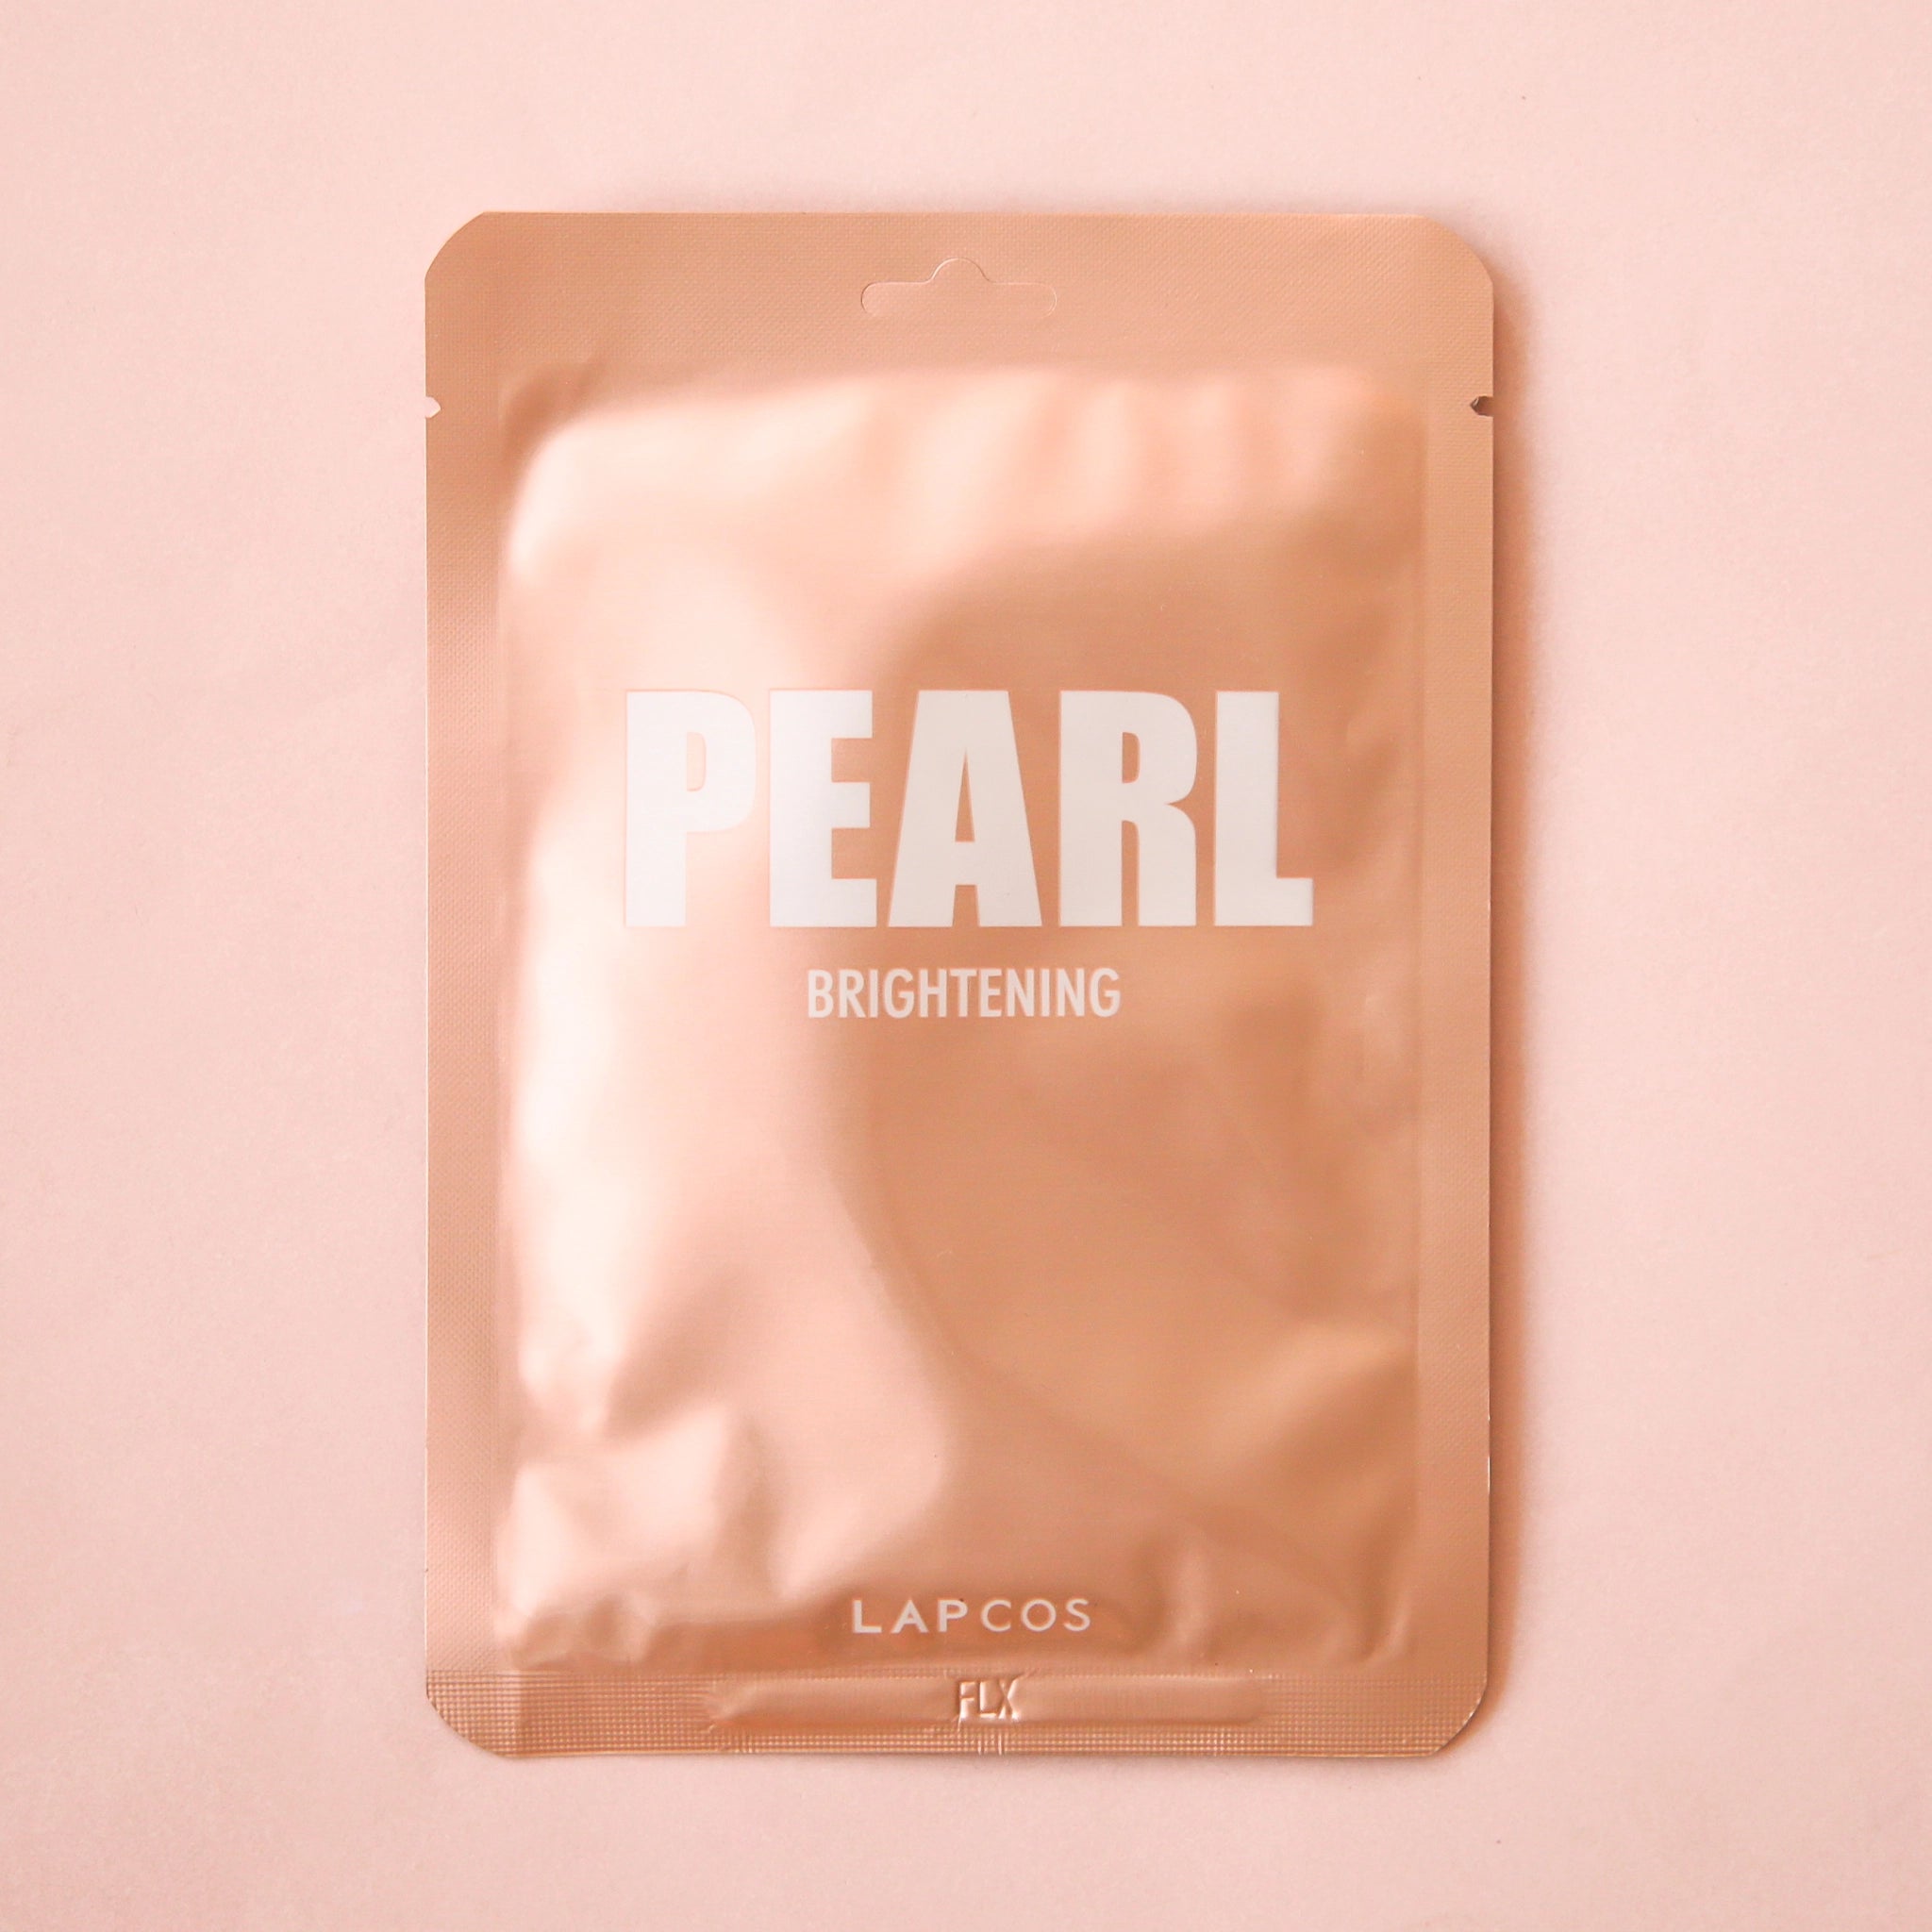 A rose gold pouch containing a face mask reads, "Pearl Brightening".